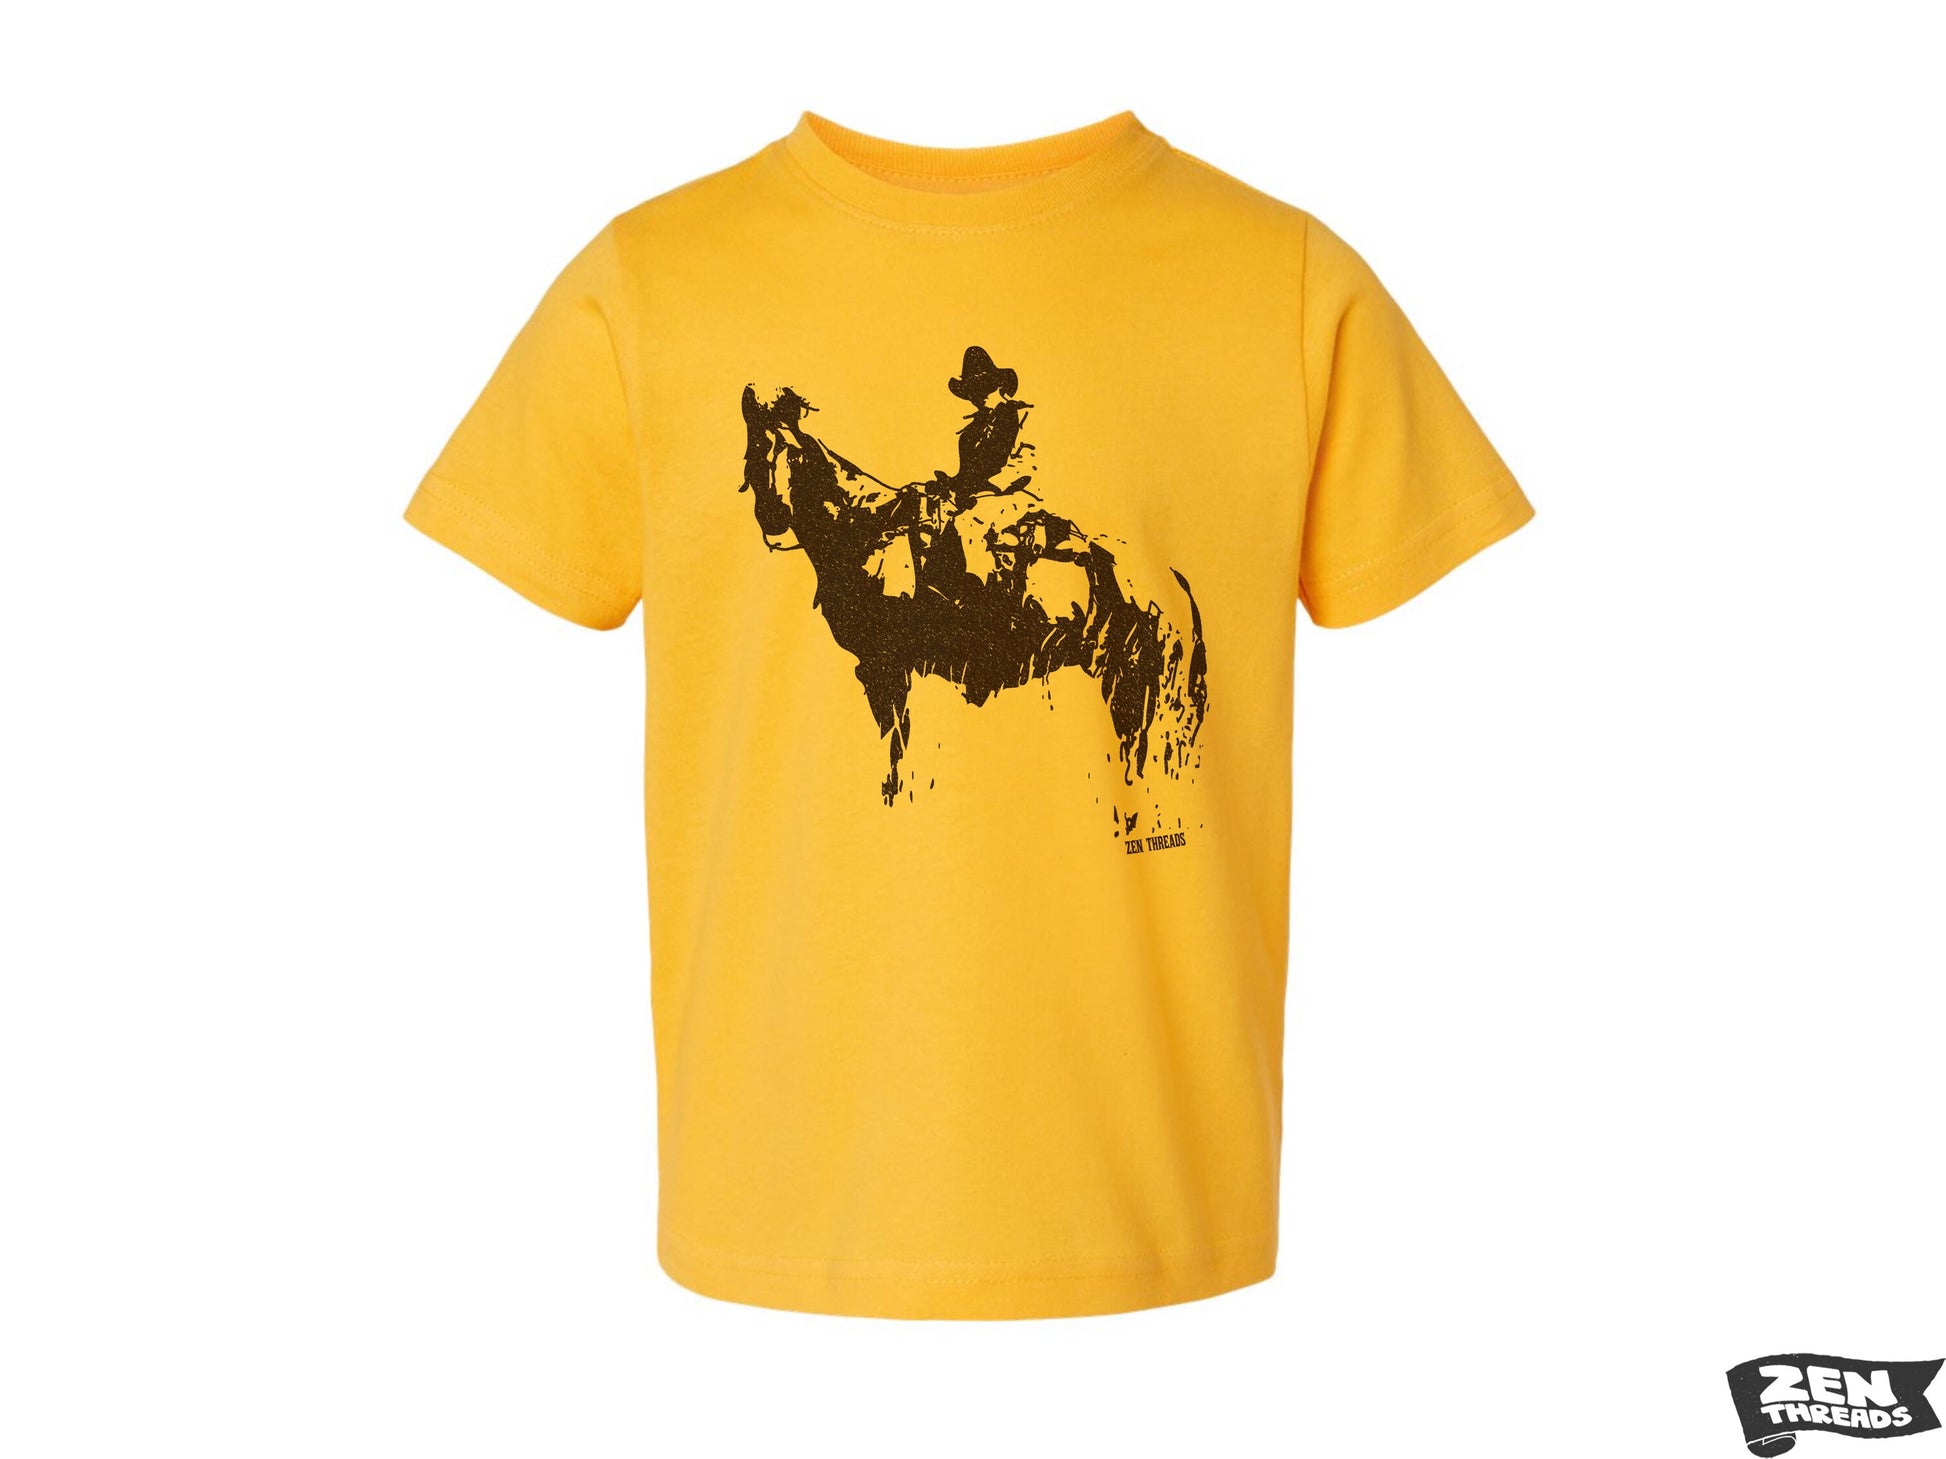 Kids COWBOY and Horse Premium vintage soft Tee T-Shirt Fine Jersey T-Shirt (+Colors) zen threads texas Wild West western youth toddler